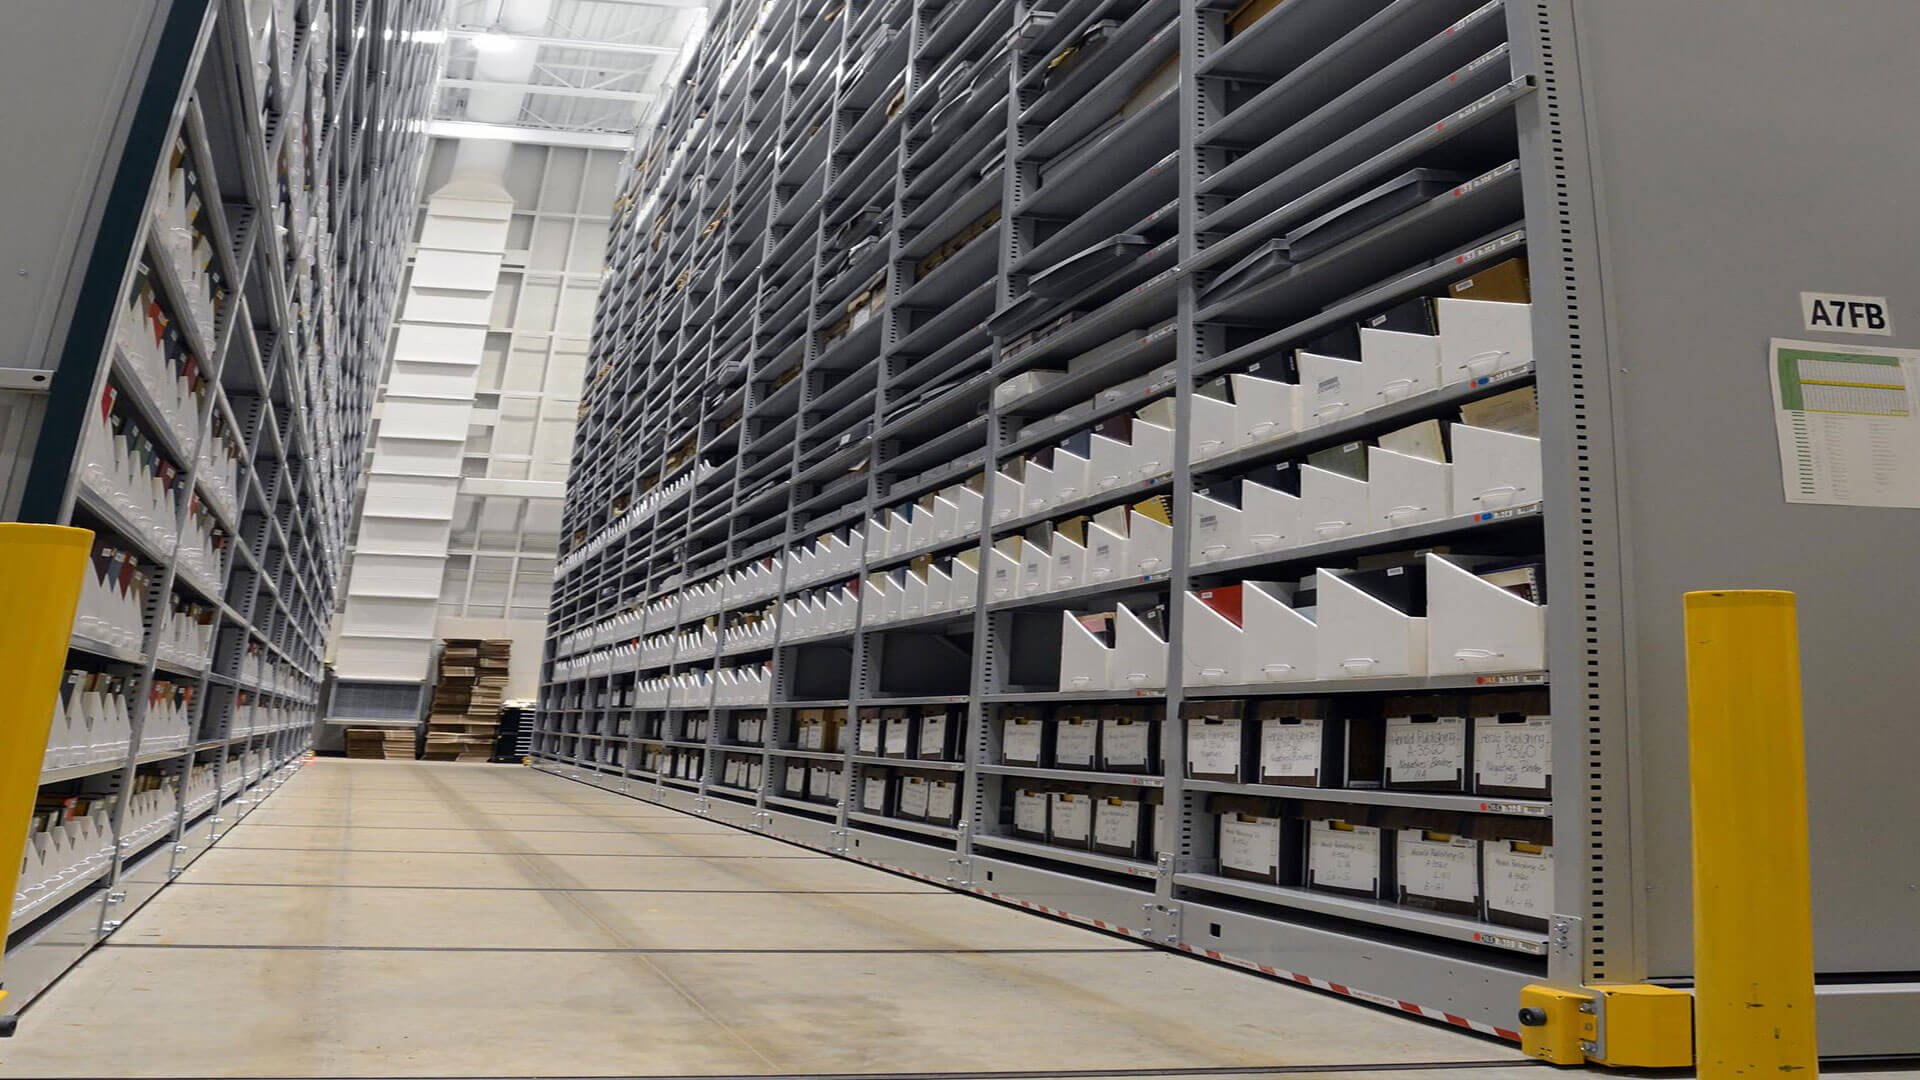 Off-site-depository-high-bay-shelving-hd